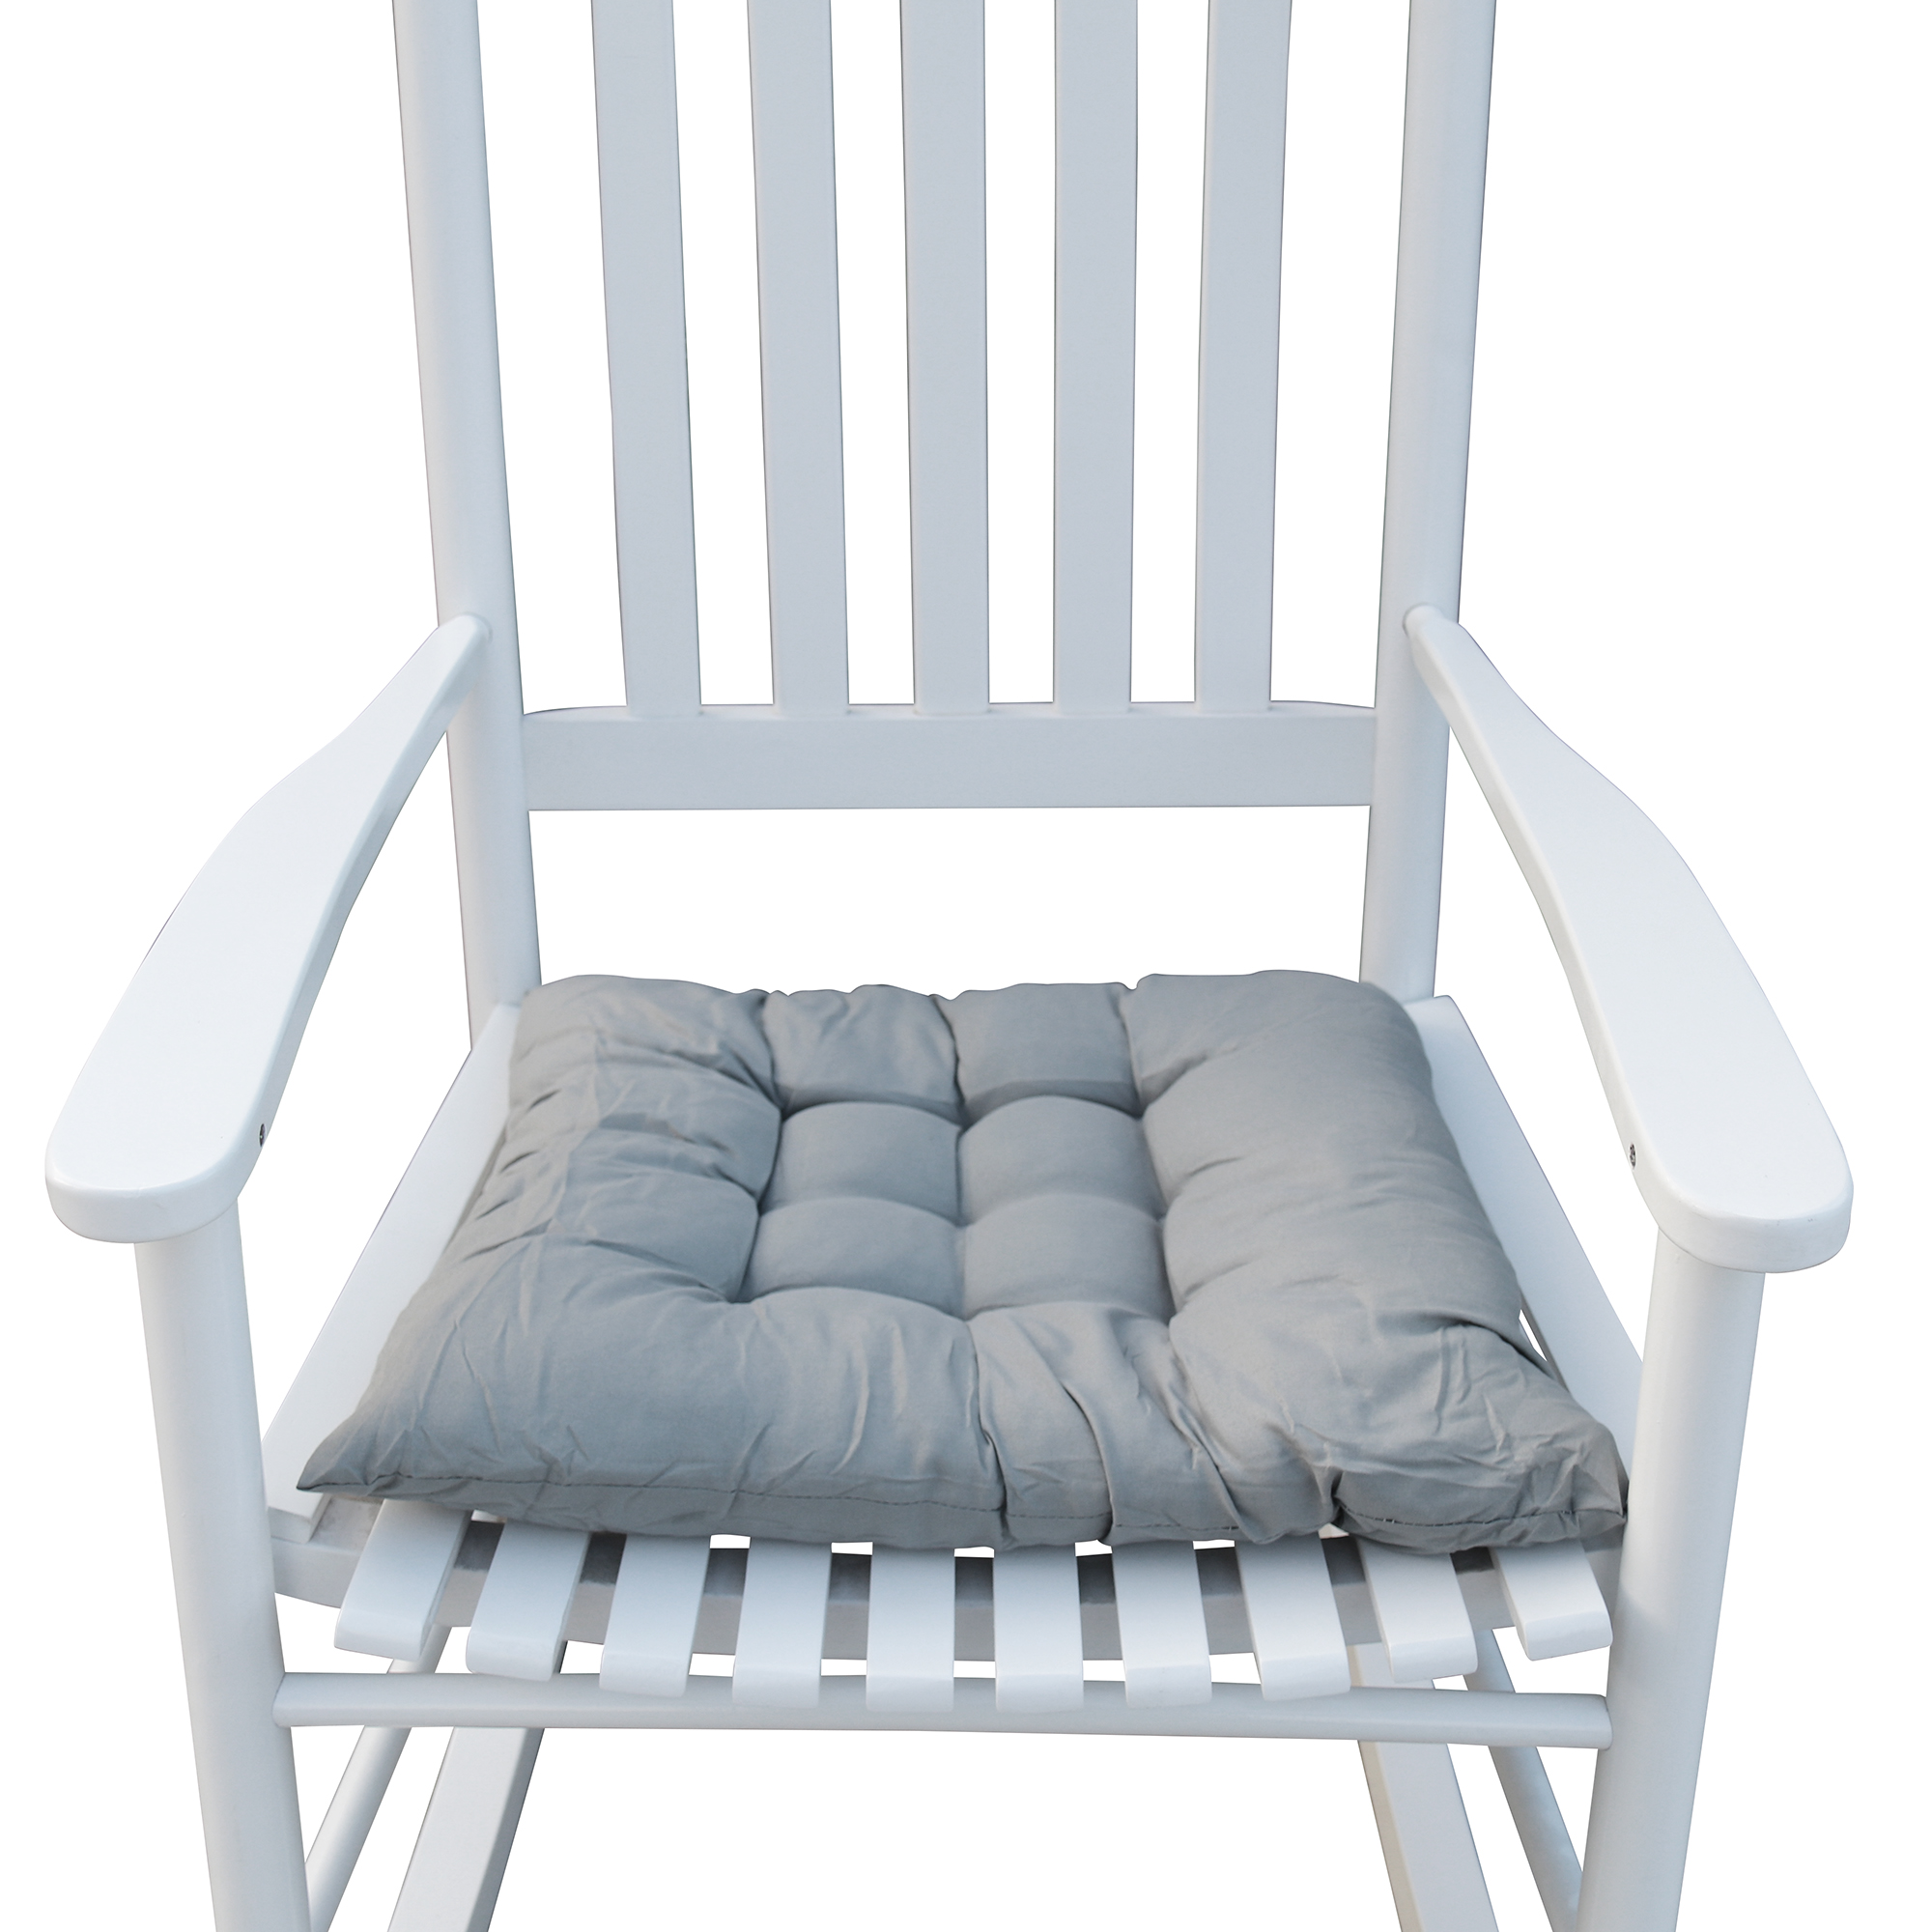 Outdoor Rocking Chair, Wood Rocker Chair for Porch Garden Patio, White24.5" L x 32.85" W x 45.3" H - image 3 of 7